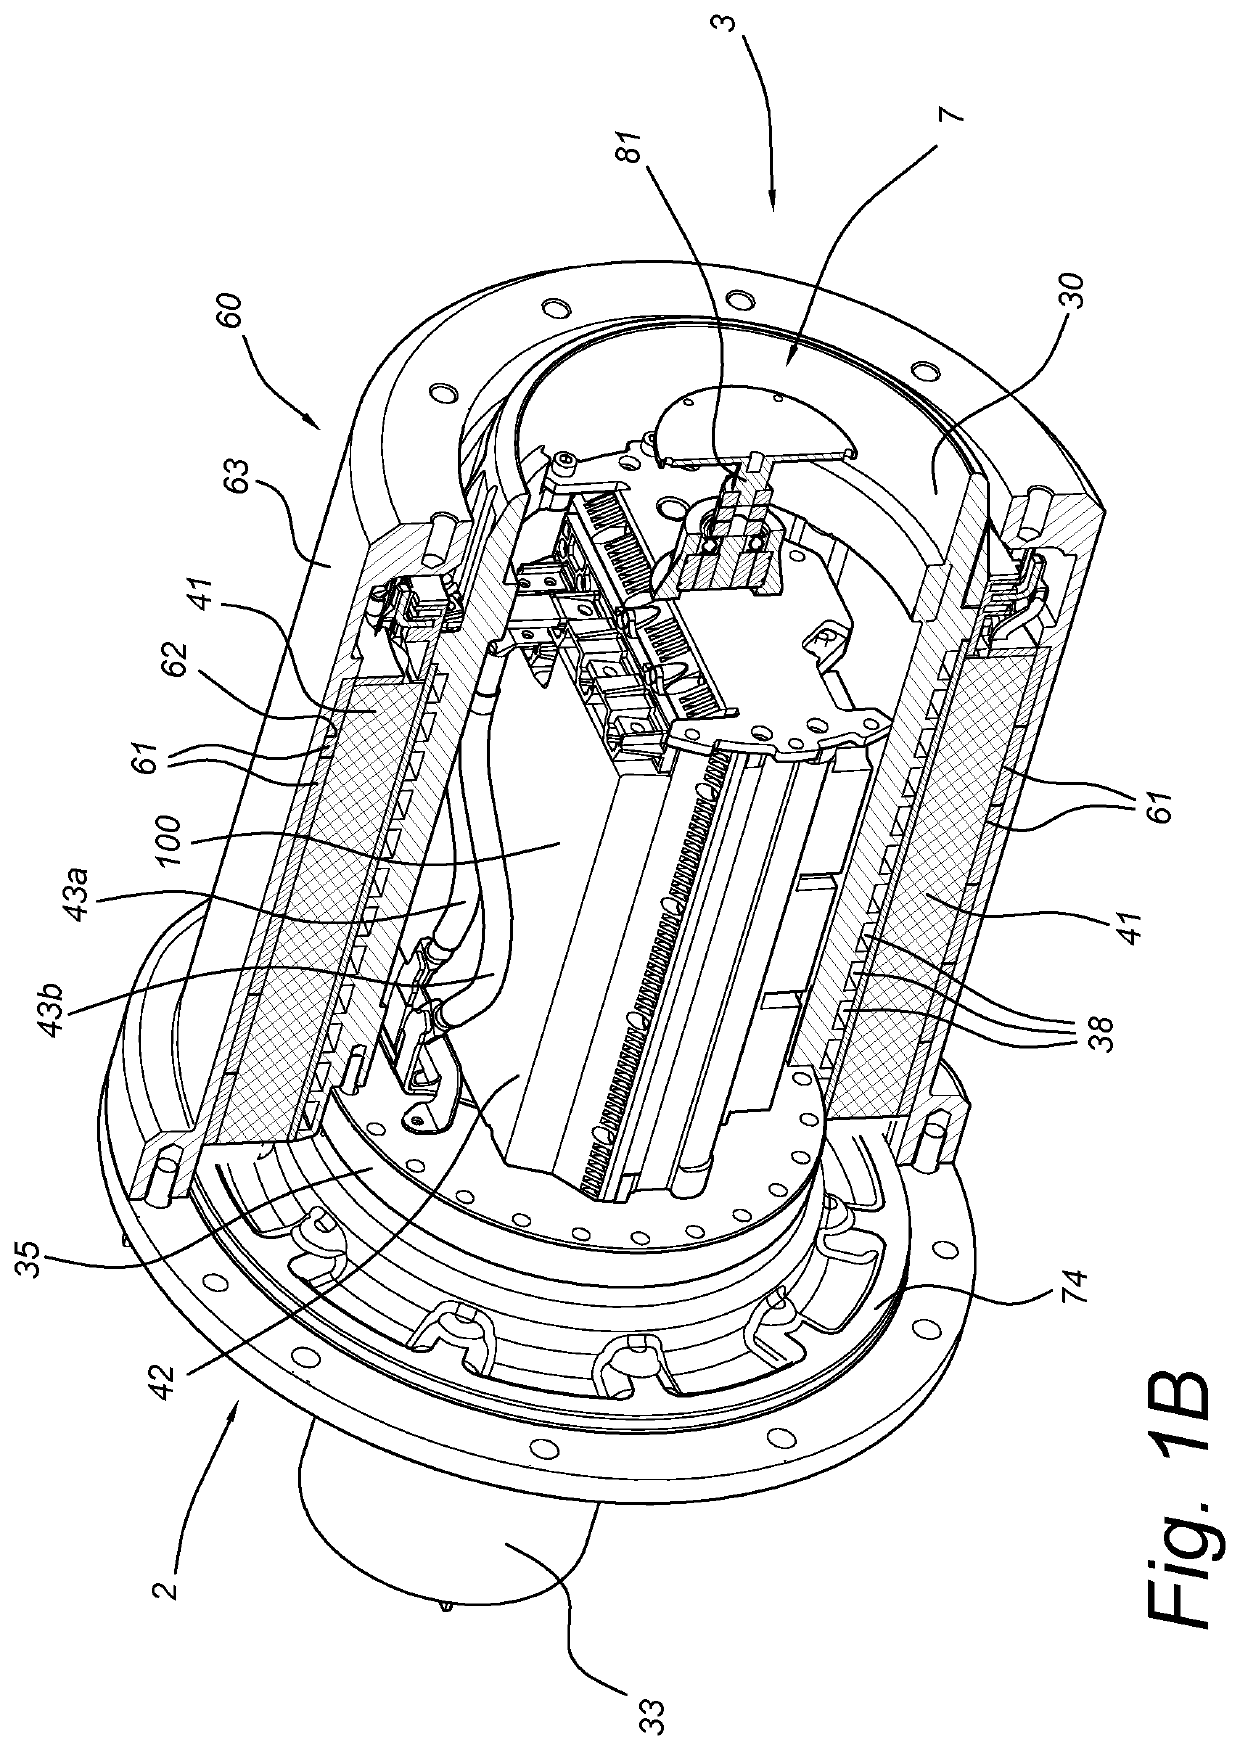 In-wheel motor provided with cooling channels, and a cooling jacket